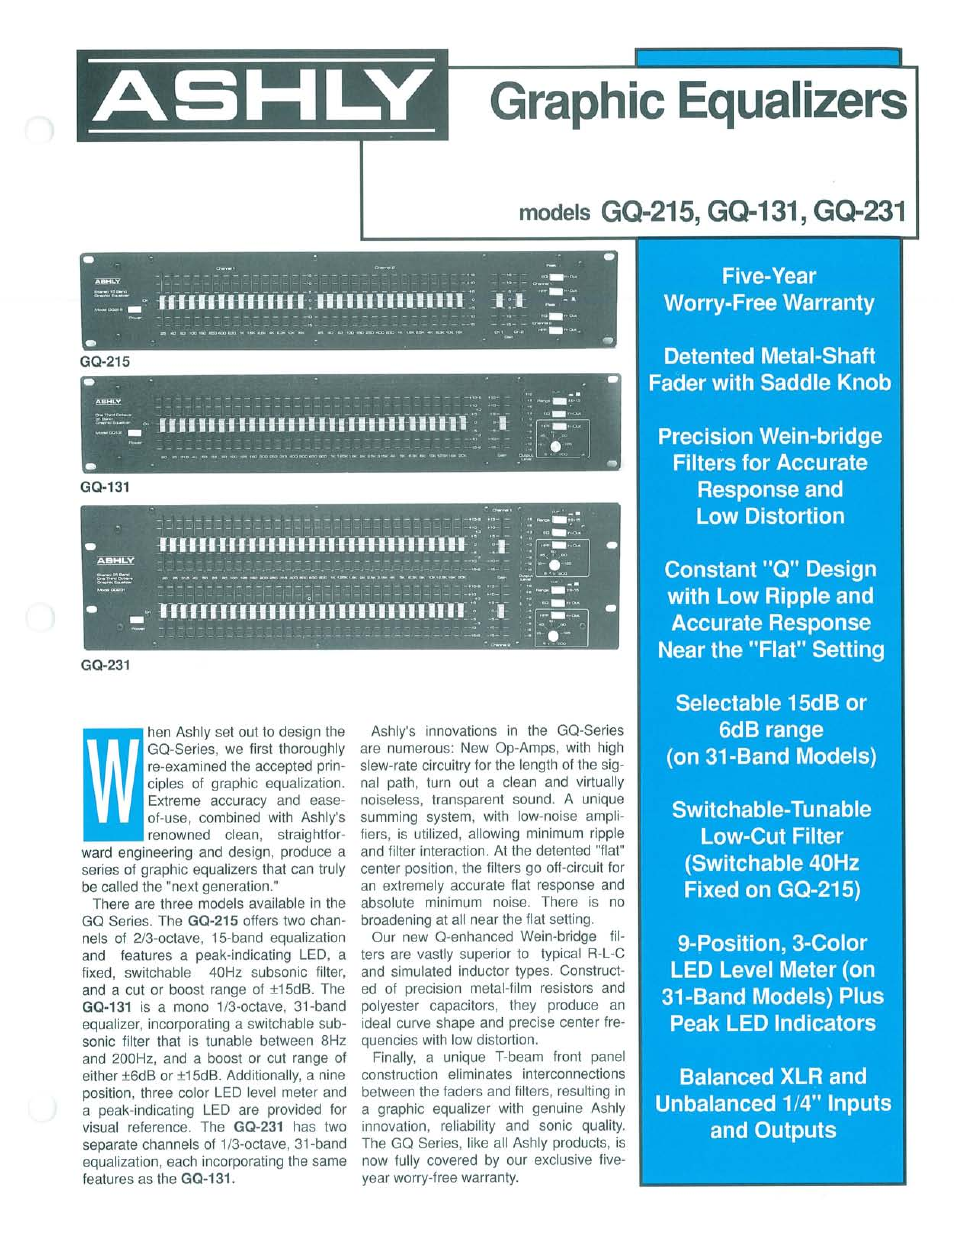 Graphic Equalizers GQ-231